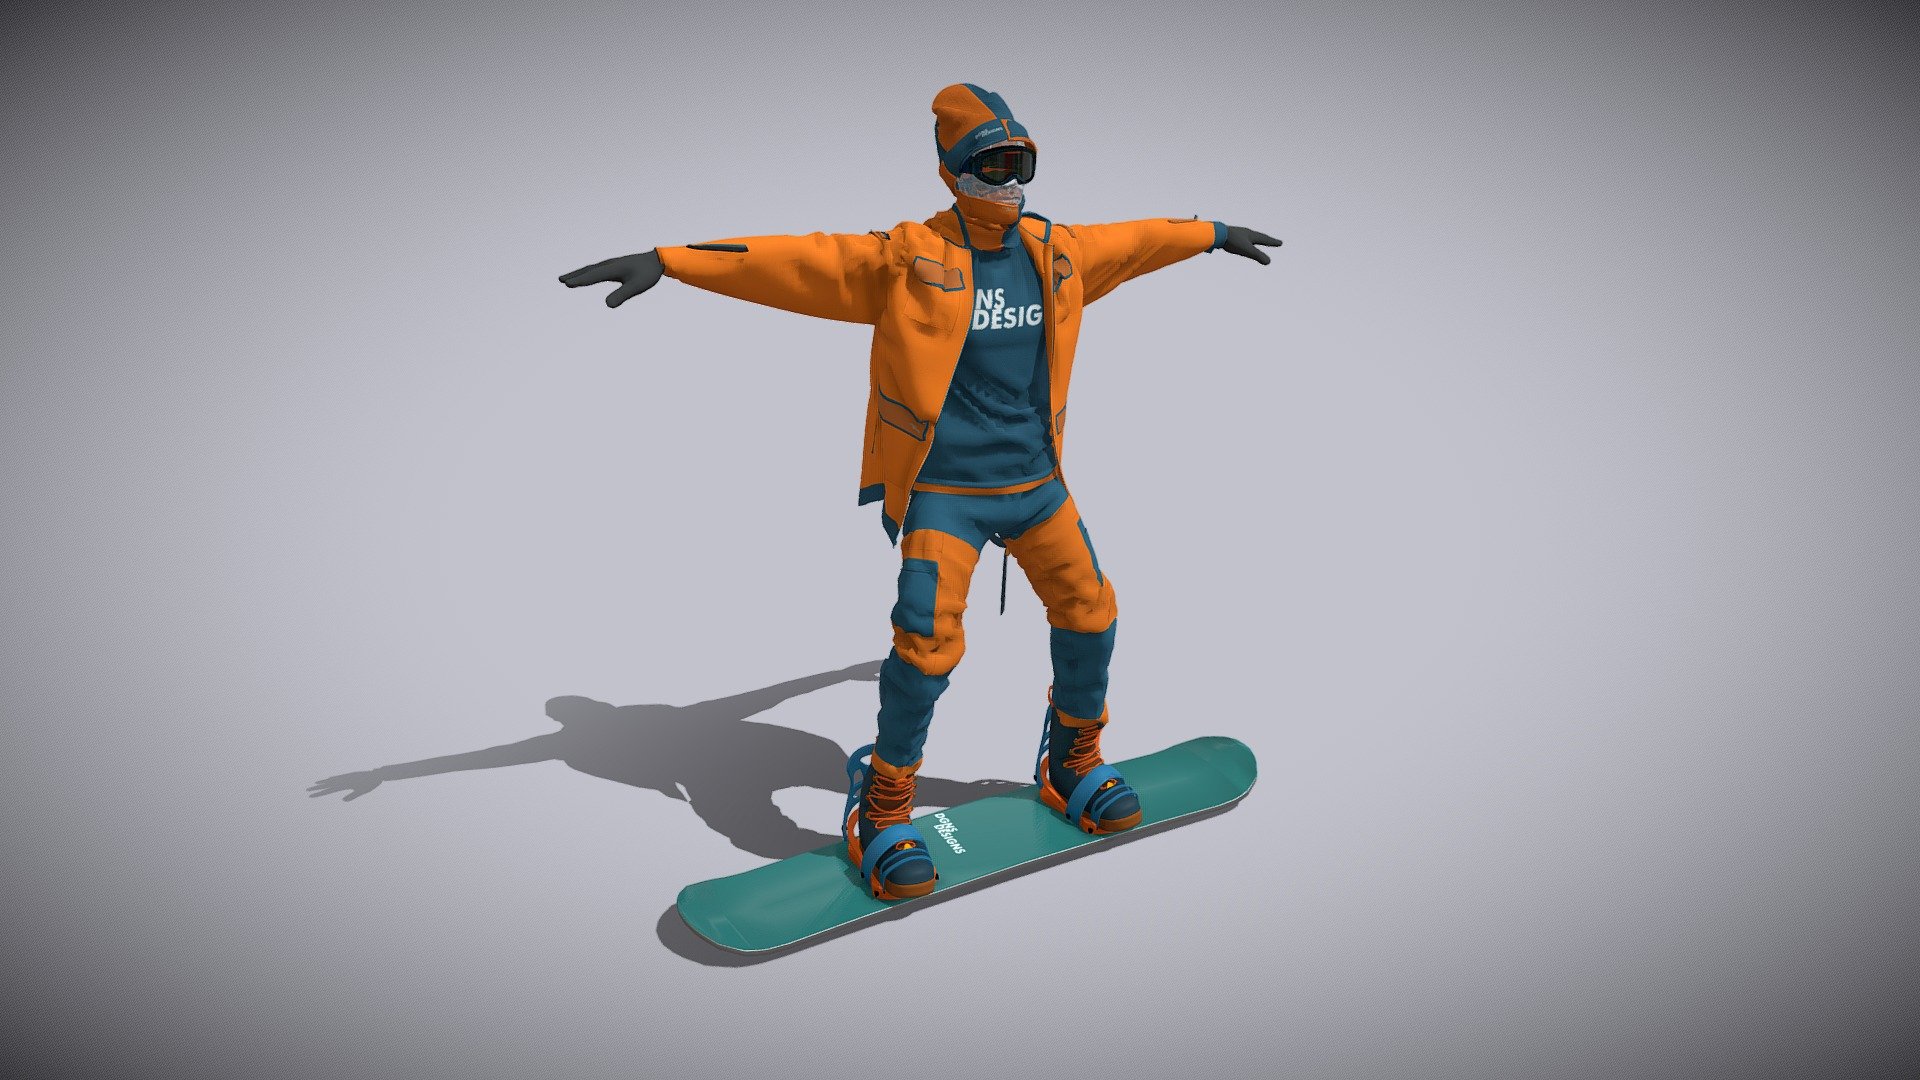 Snowboarder 3D model.
Made in Marvelous designer and blender,Low Poly as can be but with 6k textures.
Game engine ready. 

Vertices: 269069 Faces: 262547 TrIangles:917254

All my models are made with love for you to enjoy, cheers! - Snowboarder (no rig) - Buy Royalty Free 3D model by DGNS (@GuillaumeDGNS) 3d model